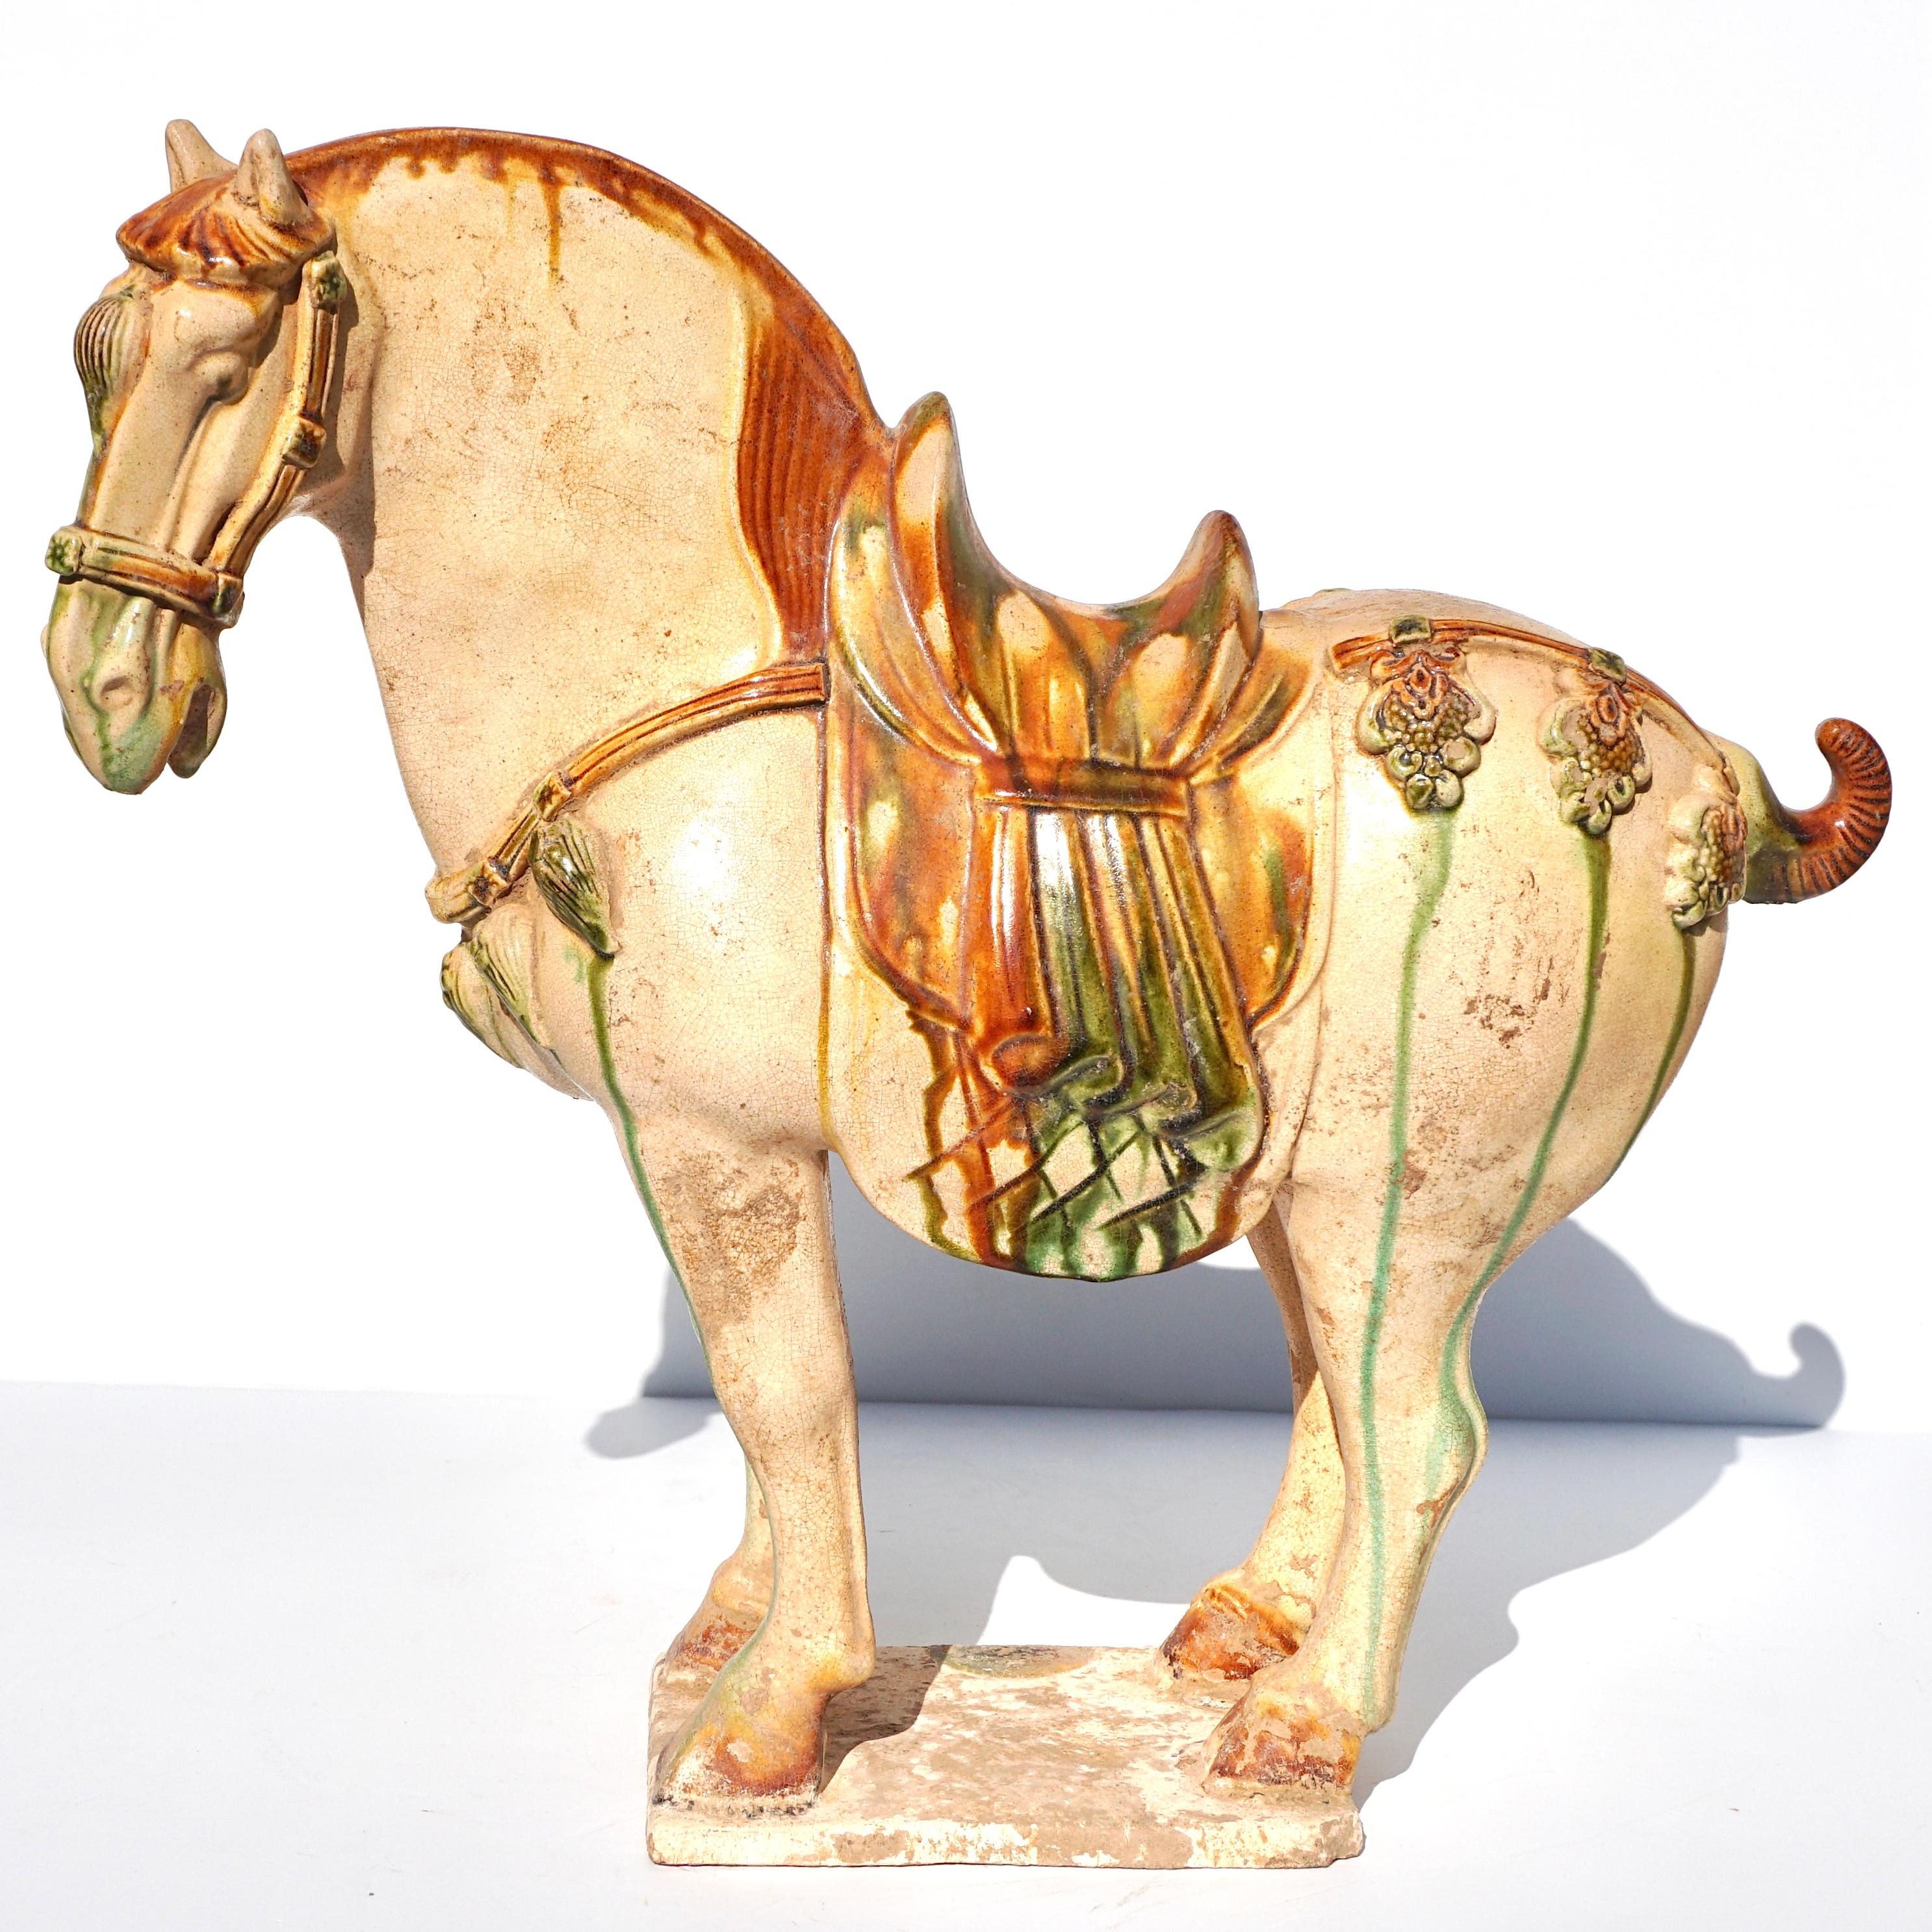 Tang Dynasty (618 - 907) Sancai glazed pottery horse

The cream-glazed horse is naturalistically modelled standing on a rectangular base, with the mane, tail and hooves highlighted in amber glaze. The head is gracefully curved to the left, with a